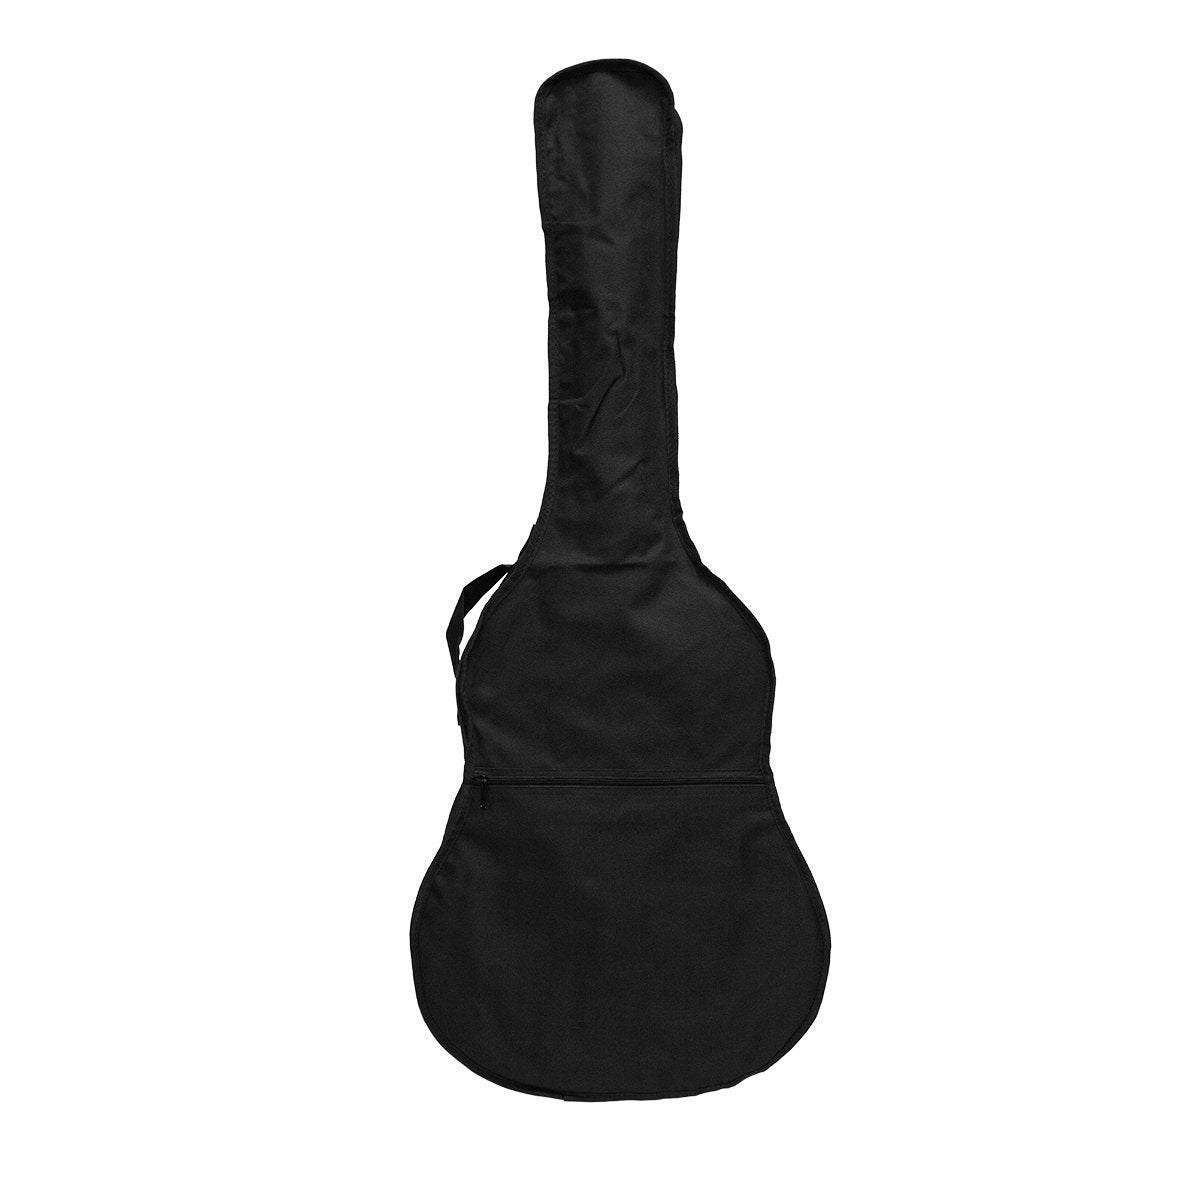 Sanchez Full-size Size Student Classical Guitar with Gig Bag (Spruce/Rosewood)